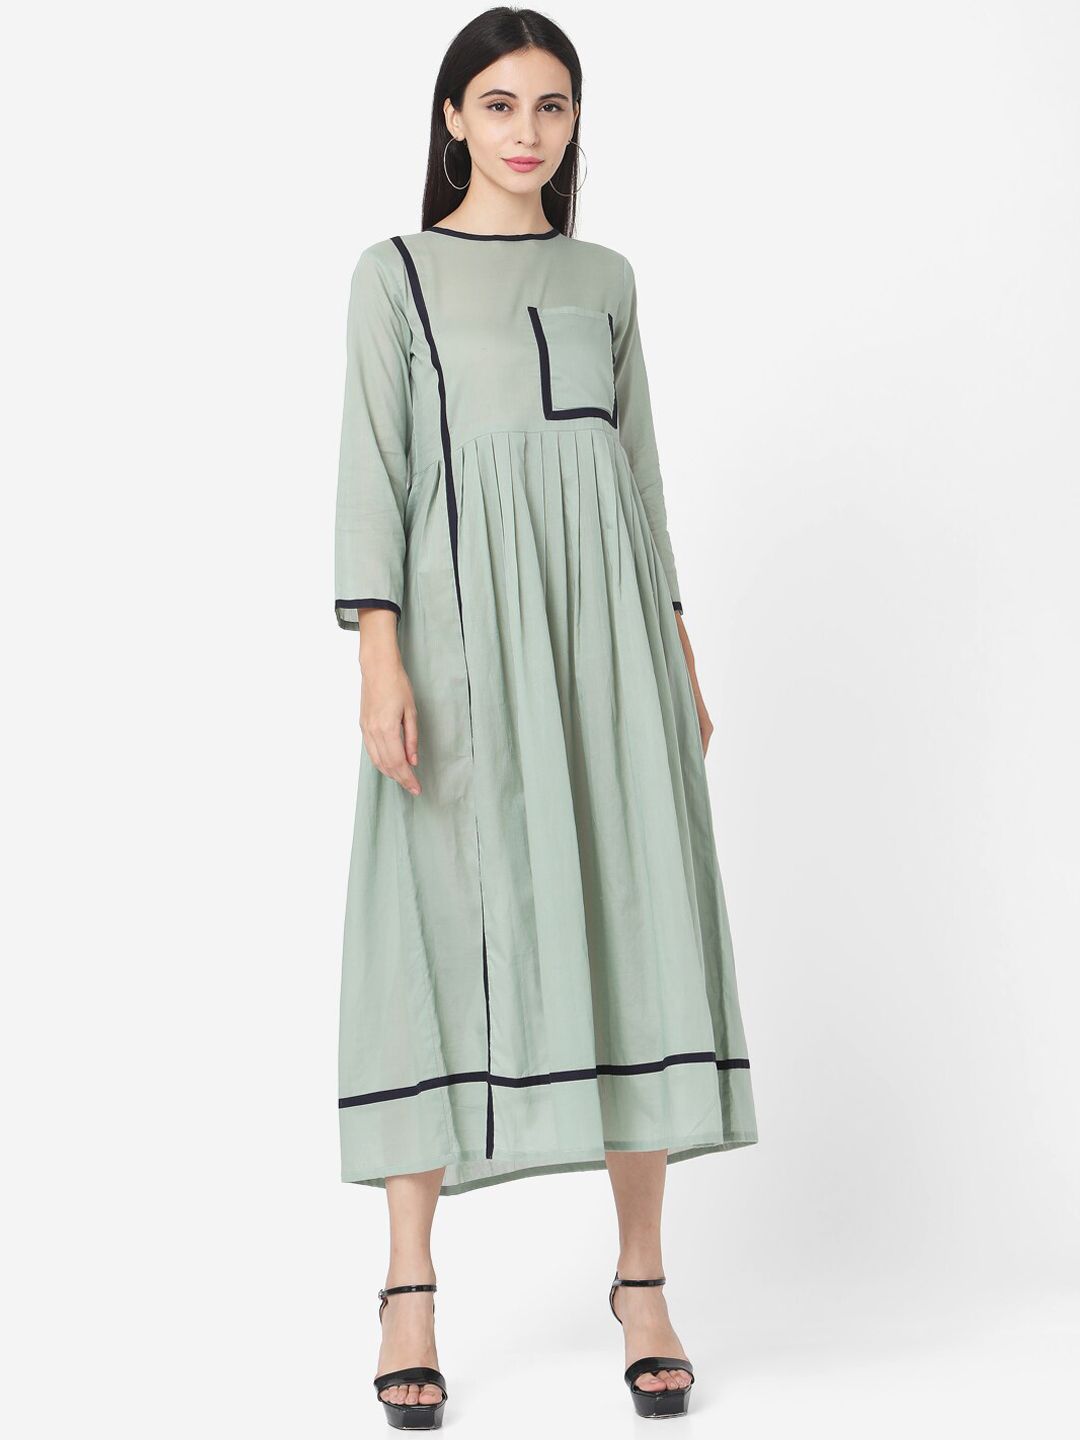 Saanjh Women Green Solid A-Line Dress Price in India